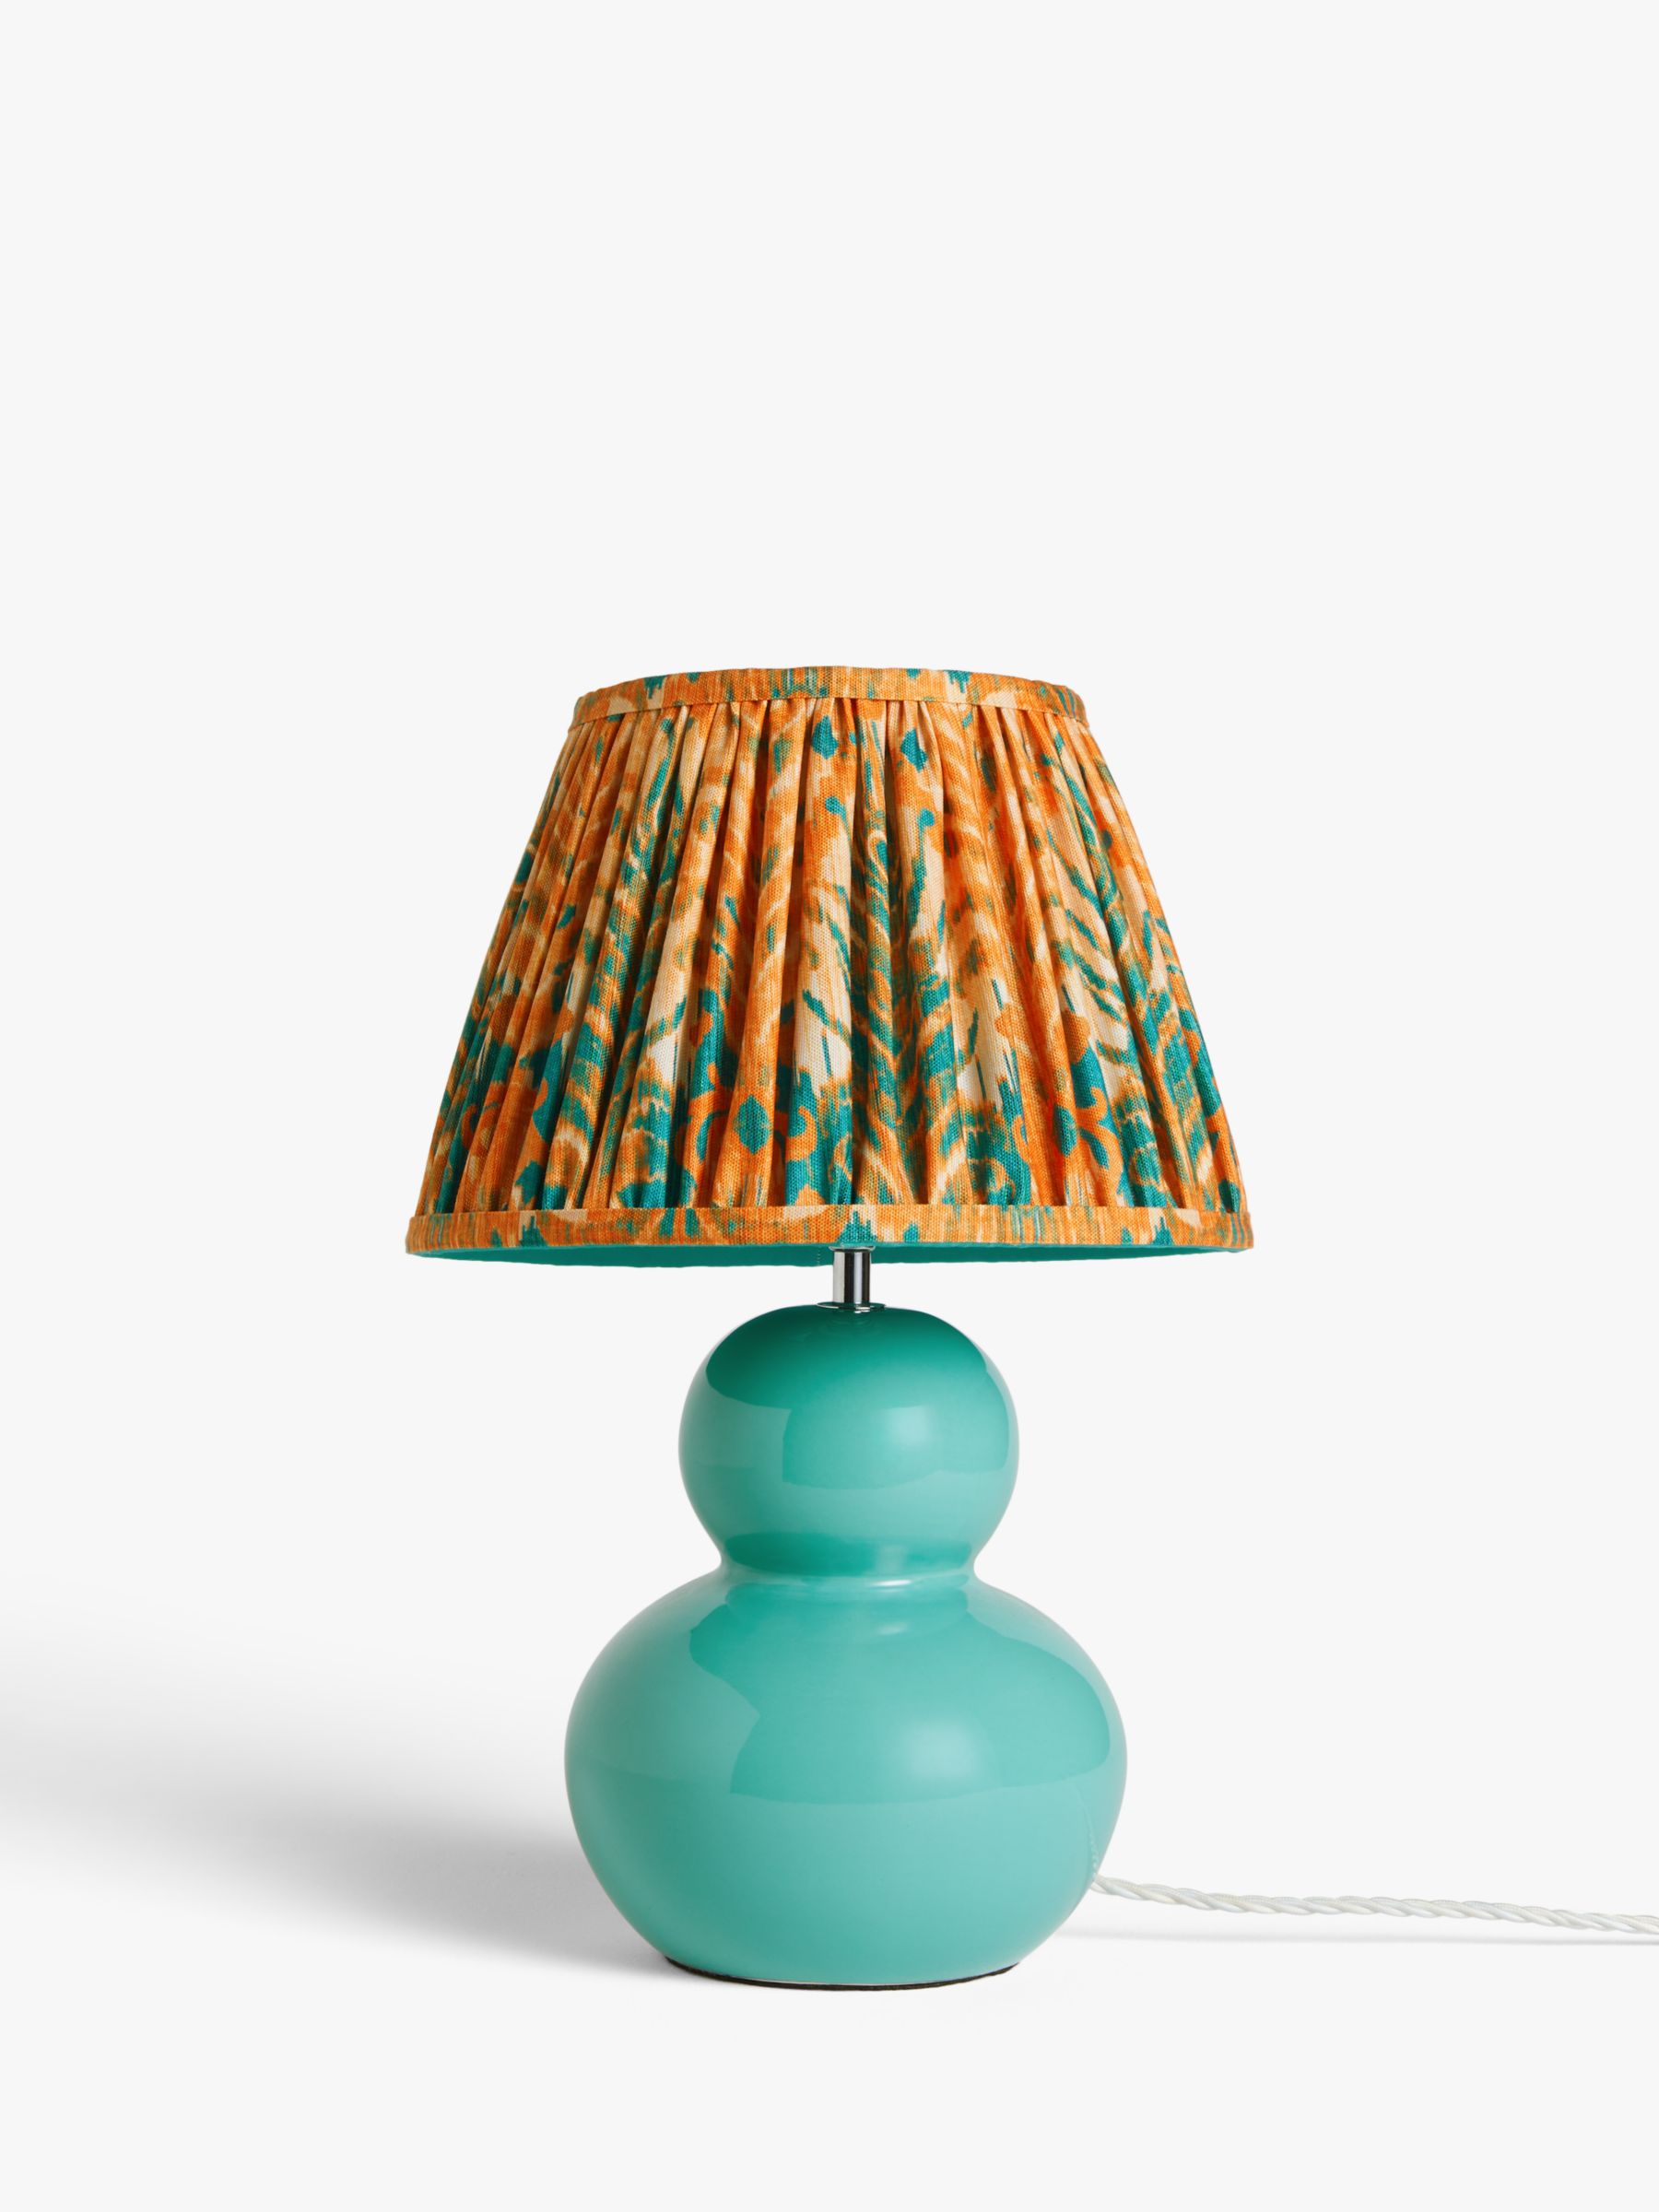 John Lewis + Matthew Williamson Curved Ceramic Lamp Base and Peacock Tapered Lampshade, Teal/Orange John Lewis + Matthew Williamson Curved Ceramic Lamp Base and Peacock Tapered Lampshade, Teal/Orange John Lewis + Matthew Williamson Curved Ceramic Lamp Base and Peacock Tapered Lampshade, Teal/Orange  Instagram24PxOutlinedIconTitle Style inspiration Share how you styled this product and feature on our website. Simply mention @johnlewis in your Instagram or upload a photo.  Previous  Instagram24PxOutlinedWhiteIconTitle  Instagram24PxOutlinedWhiteIconTitle  Instagram24PxOutlinedWhiteIconTitle  Instagram24PxOutlinedWhiteIconTitle  Instagram24PxOutlinedWhiteIconTitle  Instagram24PxOutlinedWhiteIconTitle  Instagram24PxOutlinedWhiteIconTitle  Instagram24PxOutlinedWhiteIconTitle  Instagram24PxOutlinedWhiteIconTitle  Instagram24PxOutlinedWhiteIconTitle  Instagram24PxOutlinedWhiteIconTitle  Instagram24PxOutlinedWhiteIconTitle  Instagram24PxOutlinedWhiteIconTitle  Instagram24PxOutlinedWhiteIconTitle Next Share your look John Lewis + Matthew Williamson Curved Ceramic Lamp Base and Peacock Tapered Lampshade, Teal/Orange